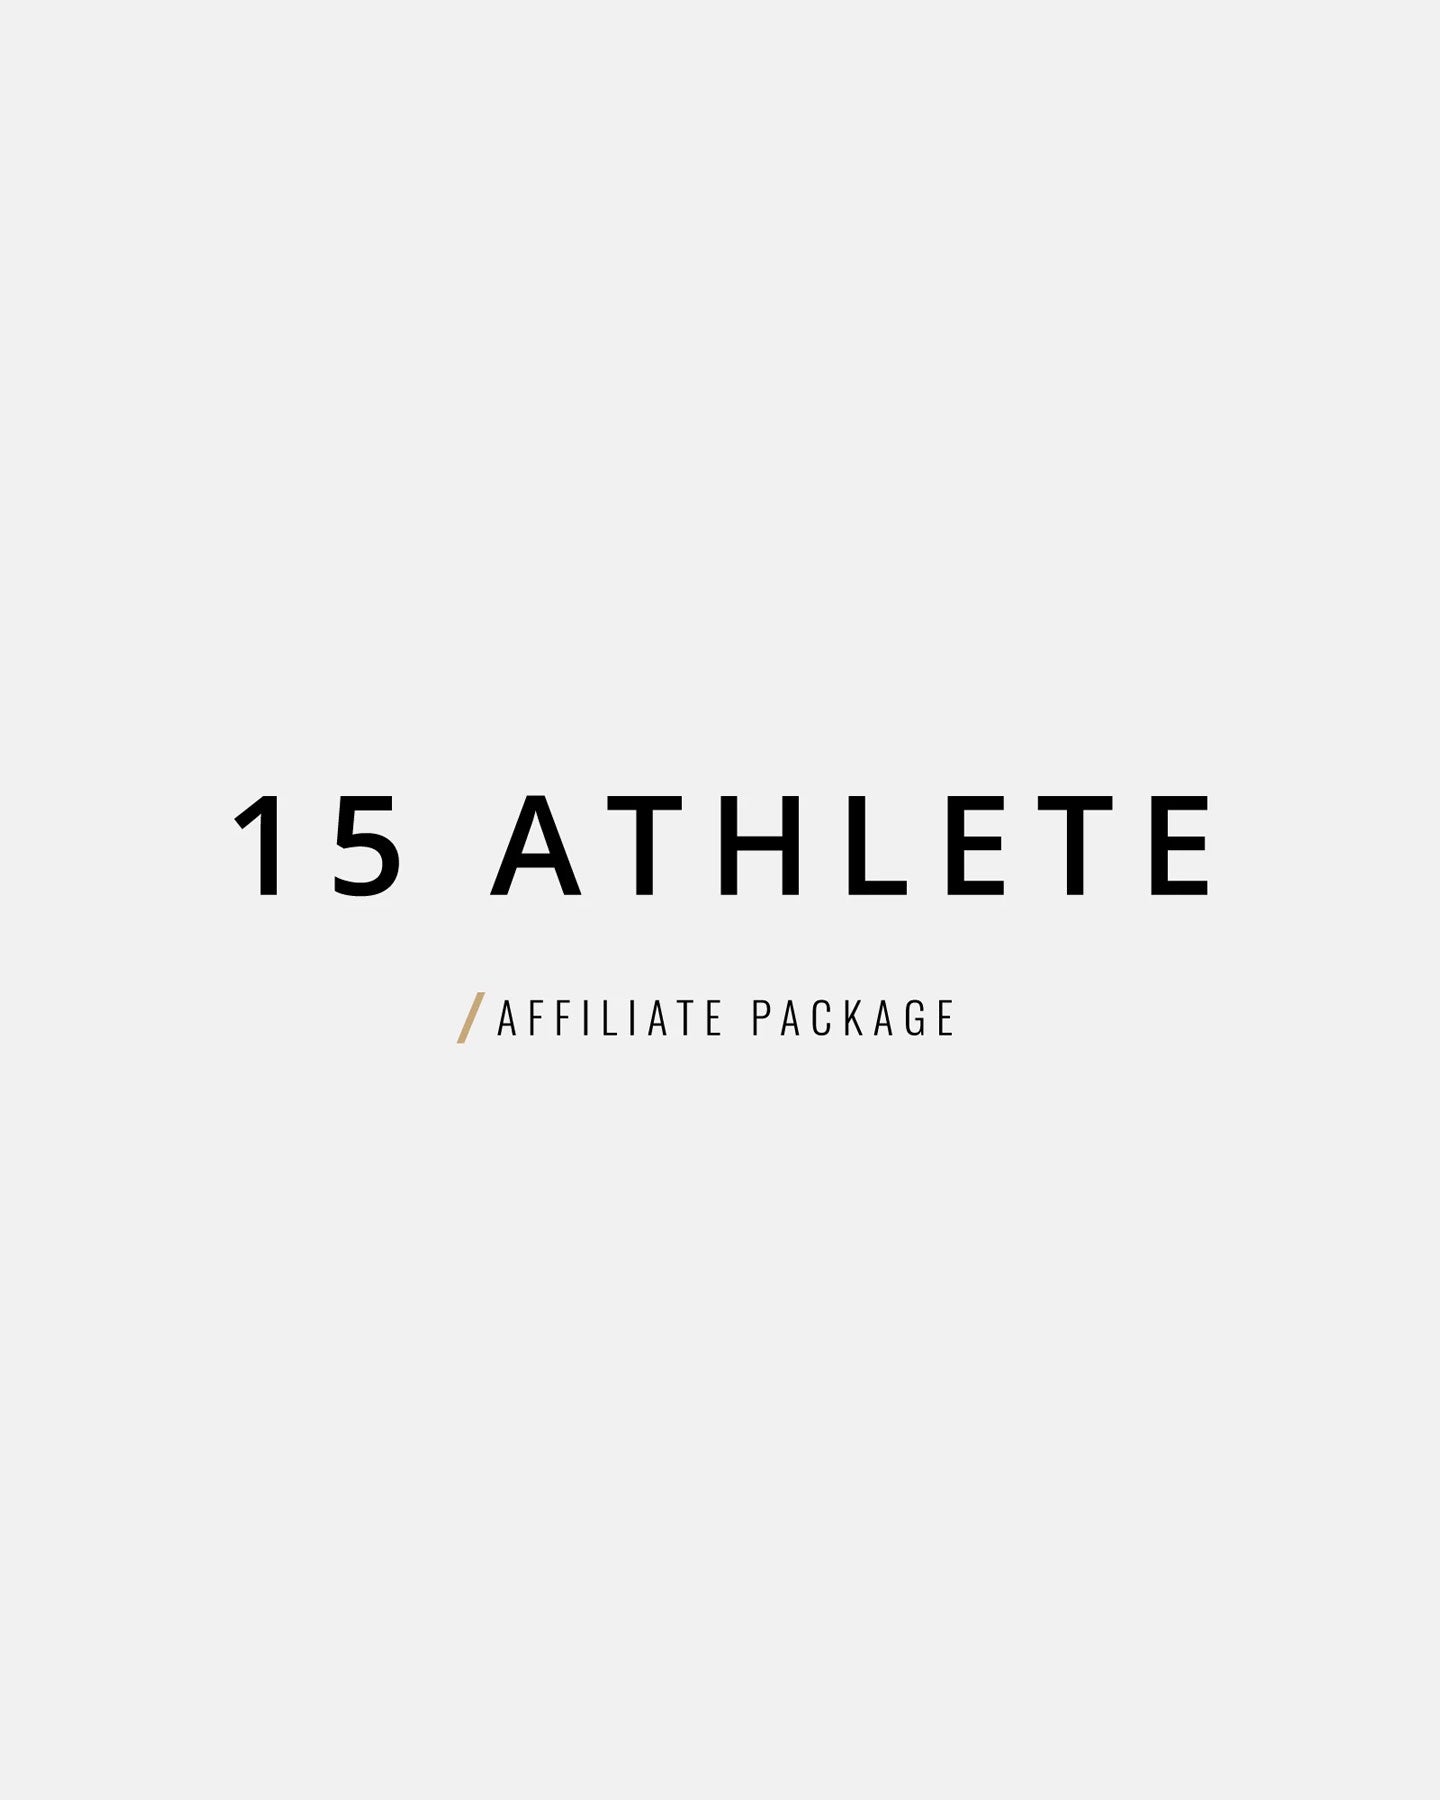 fifteen athlete affiliate gym package for crossfit gym